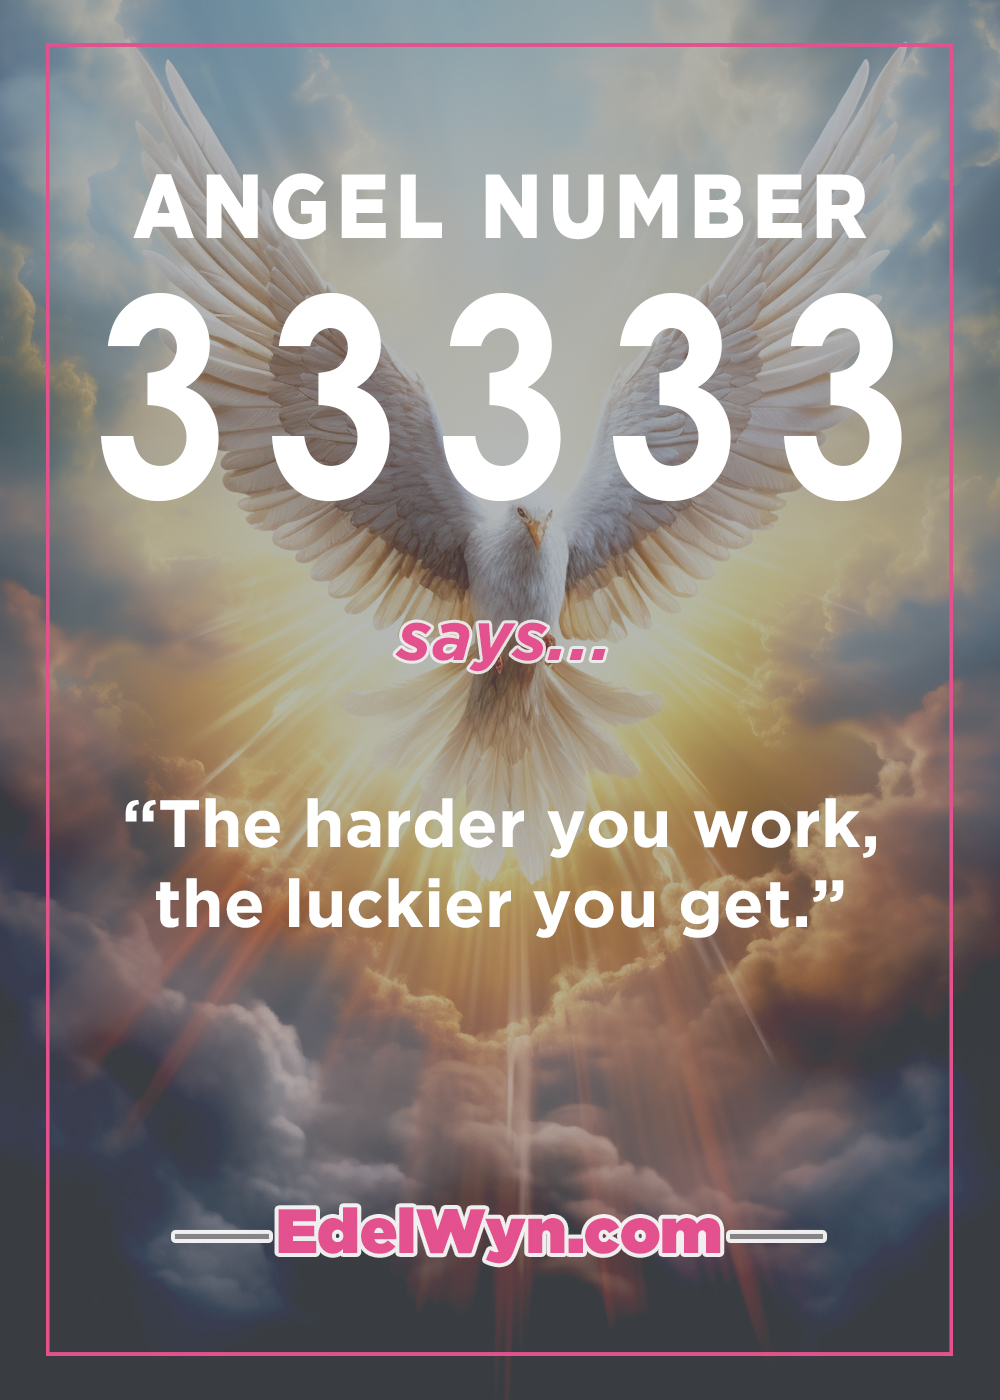 Few People Know These Facts About 33333 Angel Number